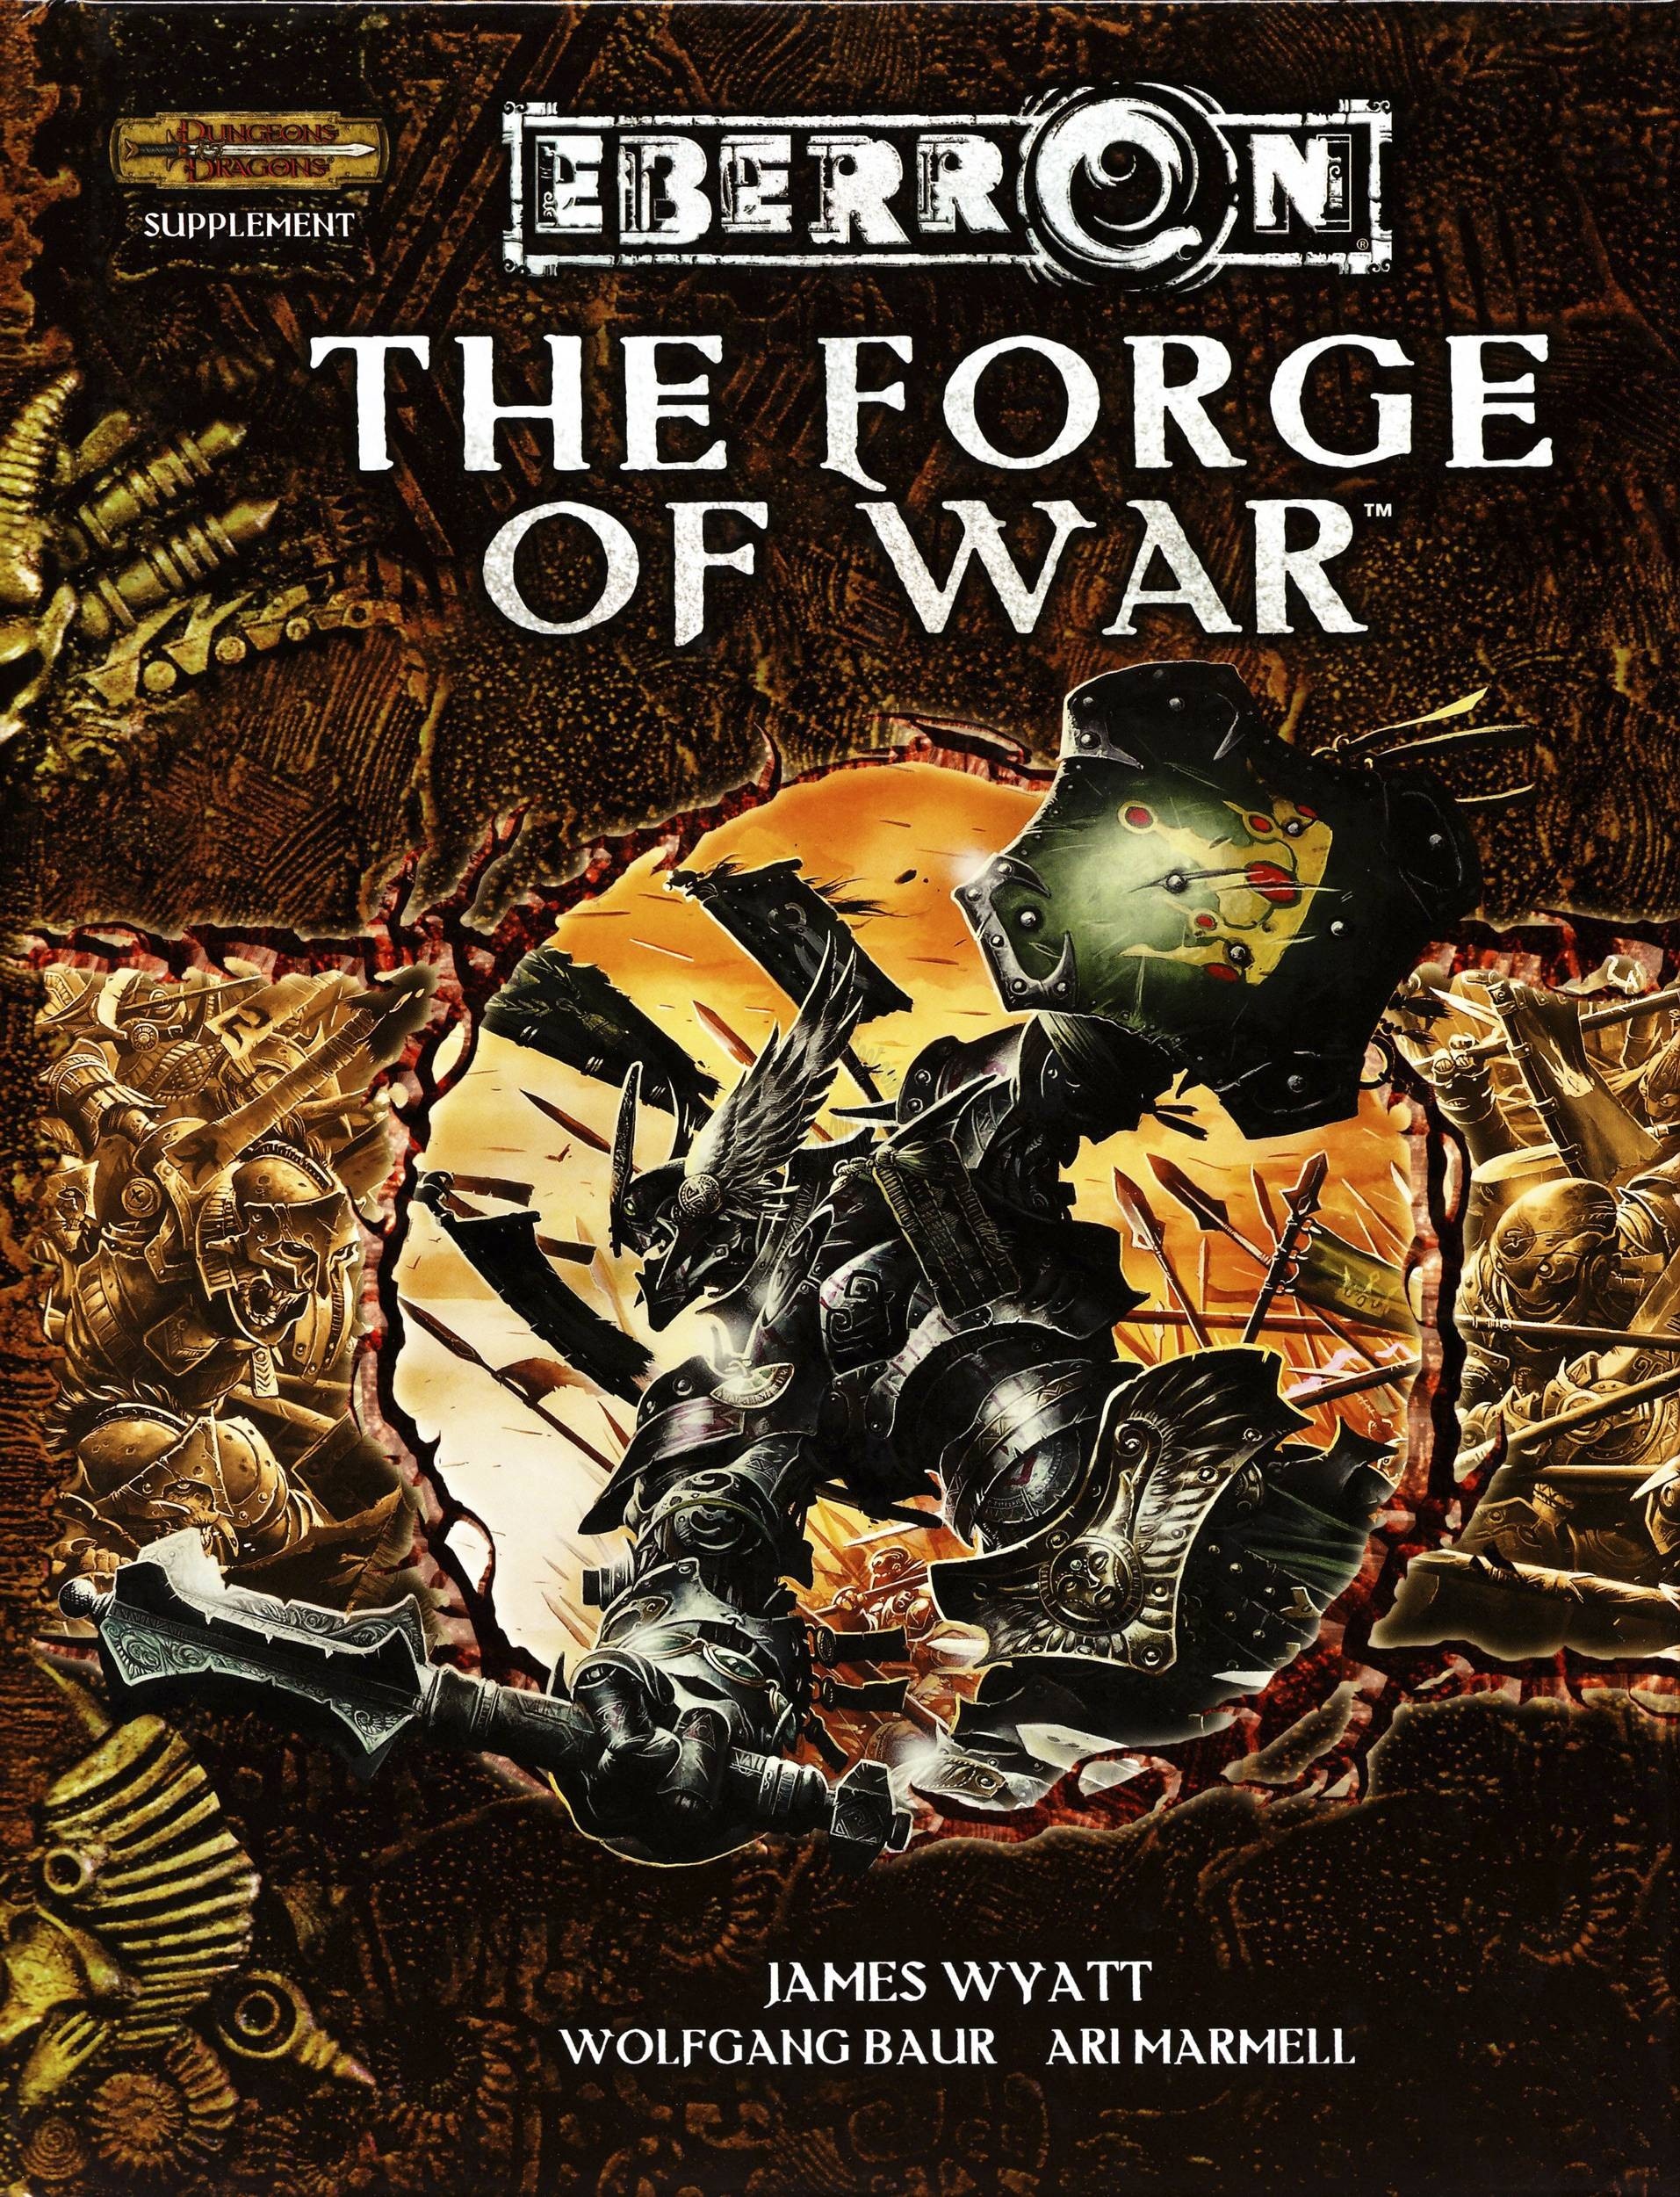 Eberron The forge of war (Dungeons & Dragons d20 3.5 Fantasy Roleplaying) FIRST PRINT - HardCover